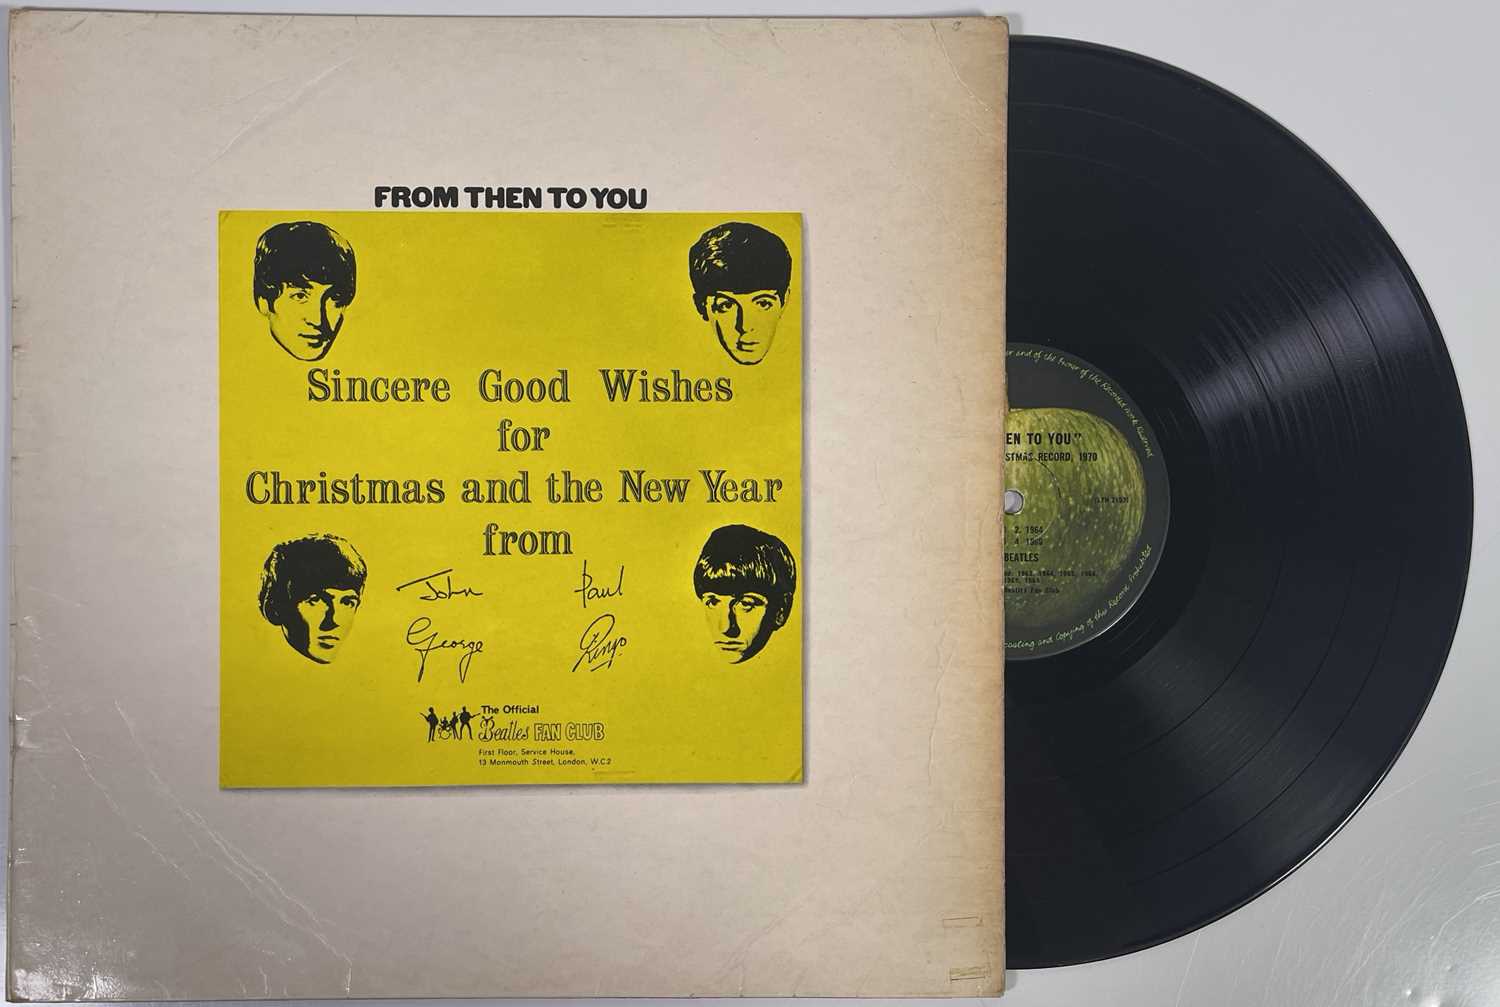 Lot 72 - THE BEATLES - FROM THEN TO YOU LP (ORIGINAL UK PRESSING - LYN 2153/2154)